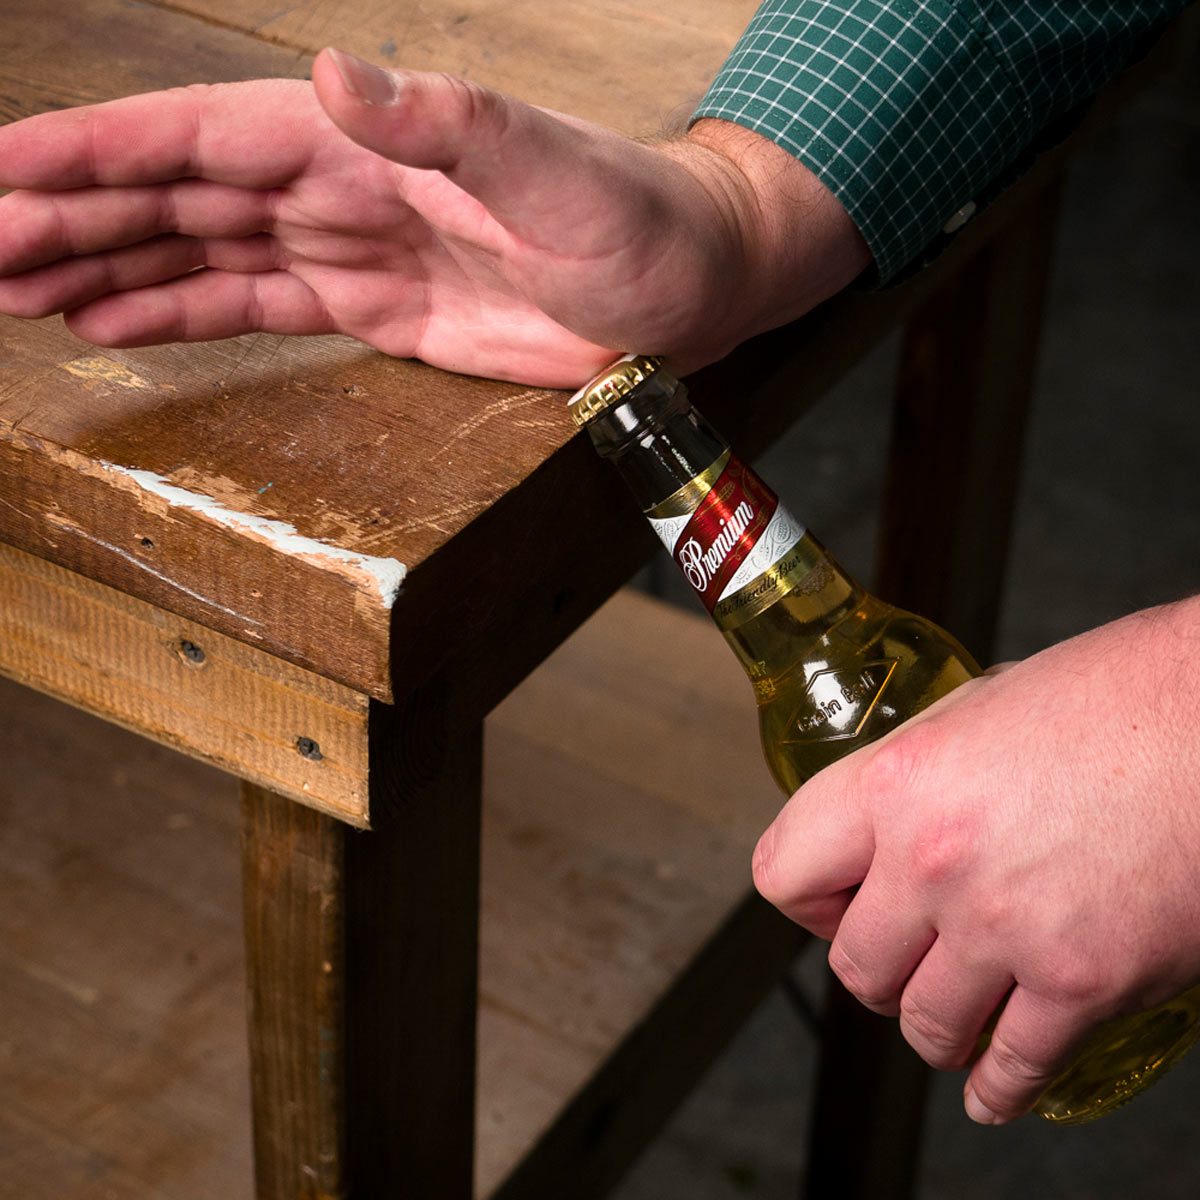 How to Open a Bottle of Beer Without An Opener